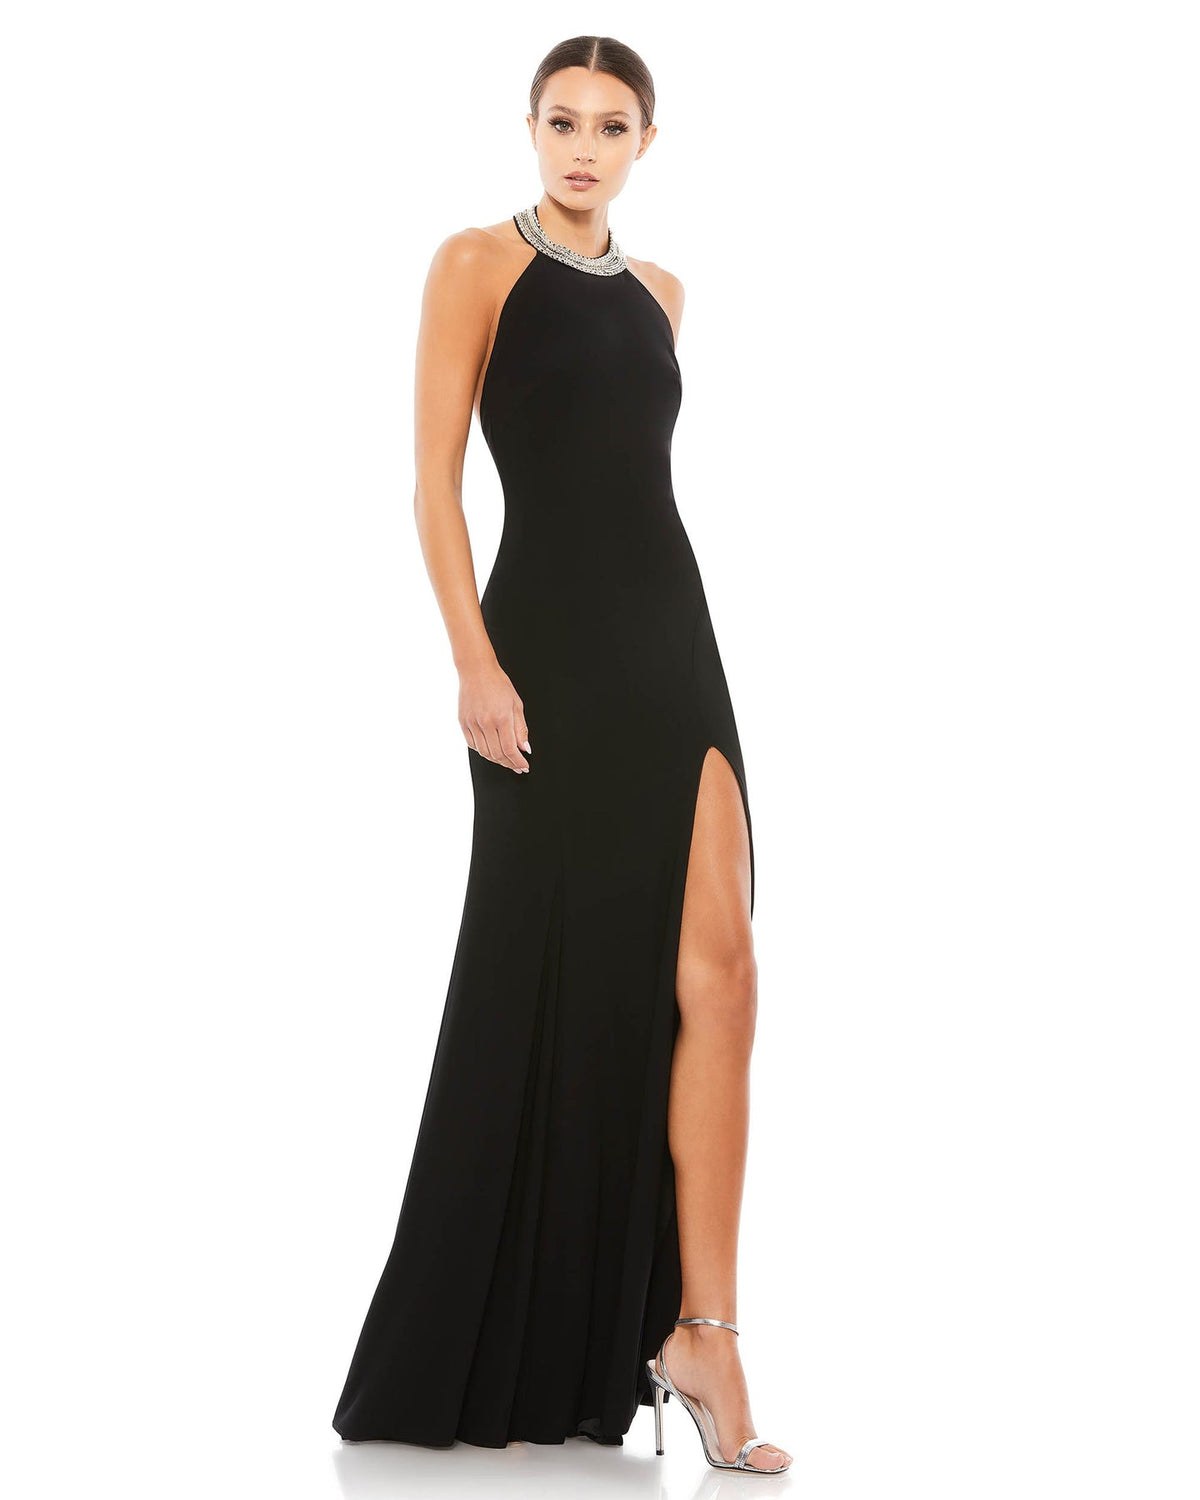 MAC DUGGAL, BEADED HALTER JERSEY GOWN, Style #25572